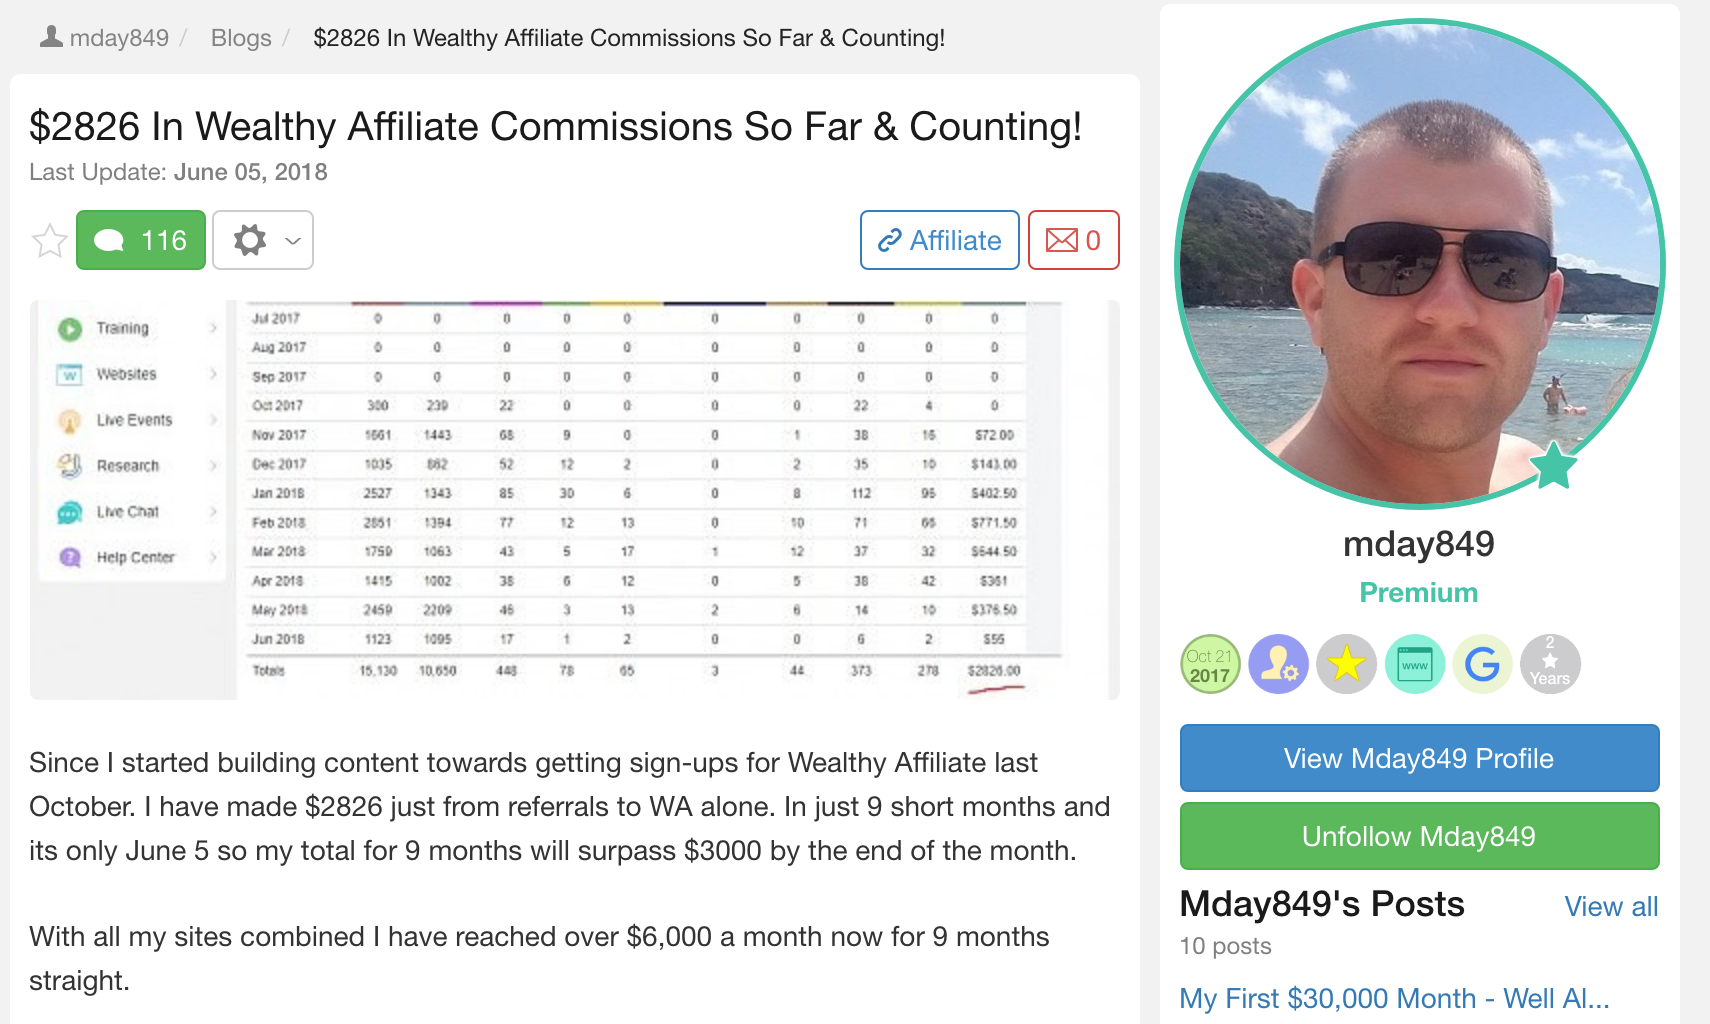 Michael makes $2,826 in Wealthy Affiliate Commissions 